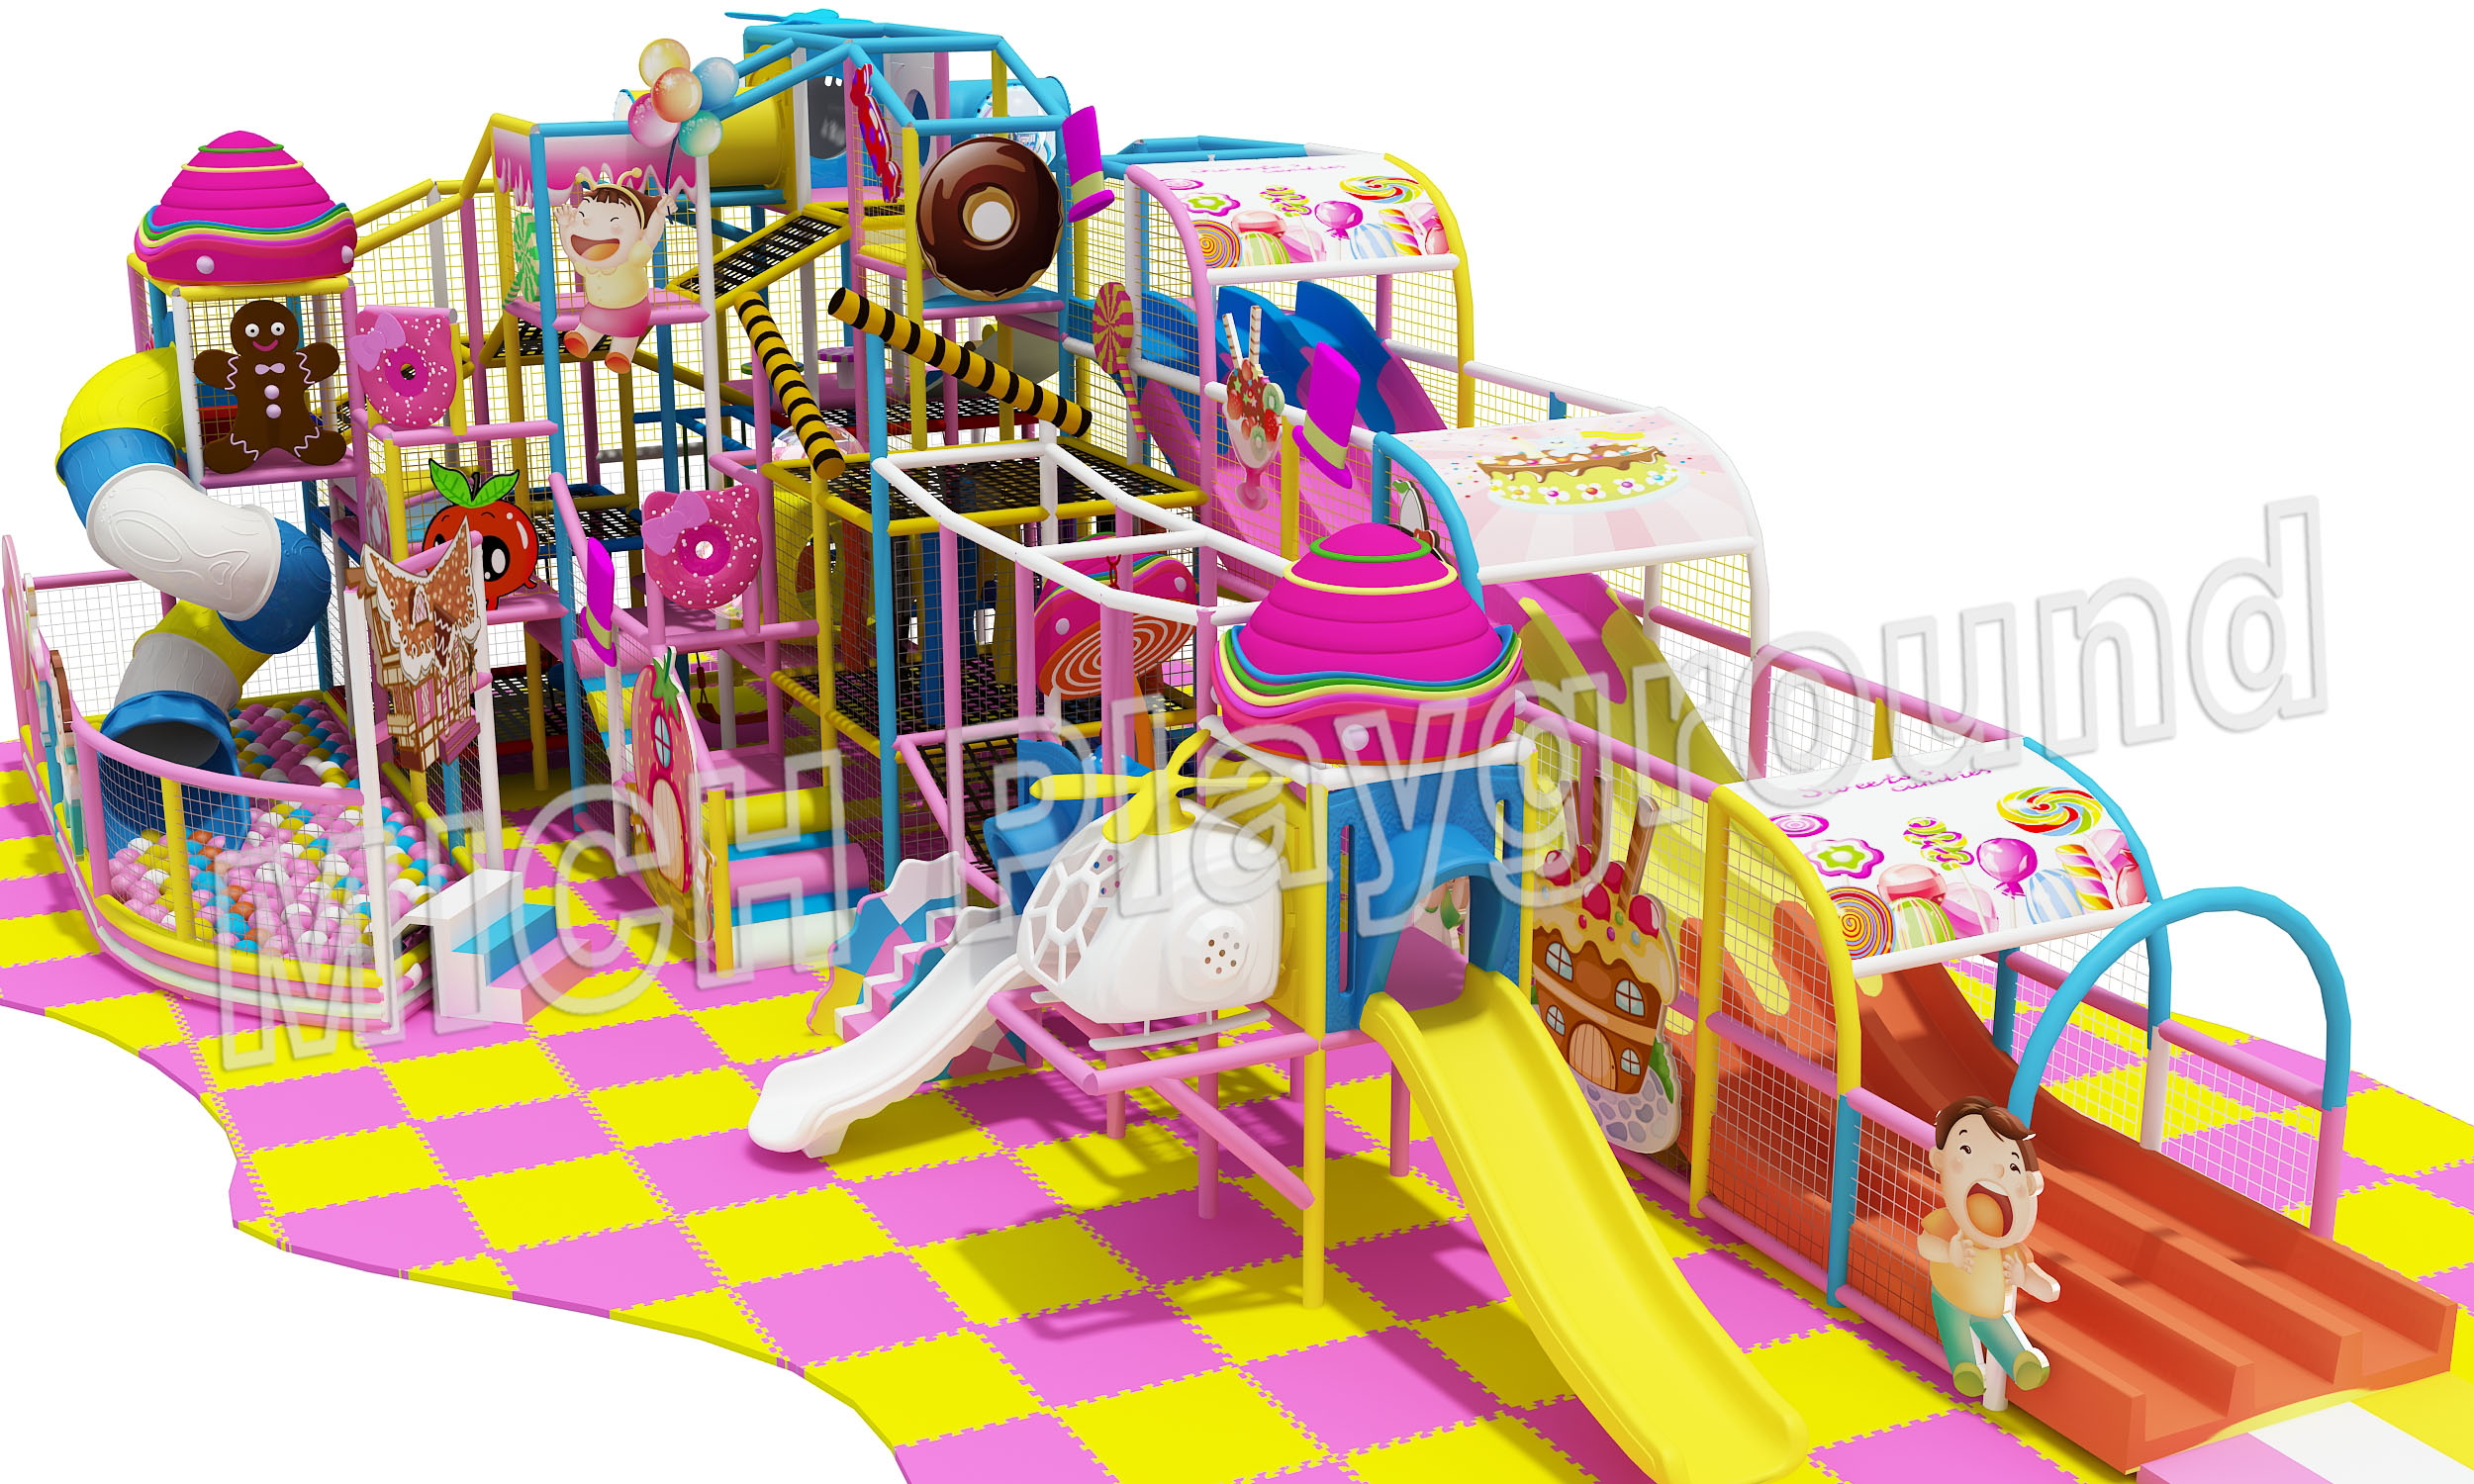 Mich Funny Indoor Amusement Playground 6645A